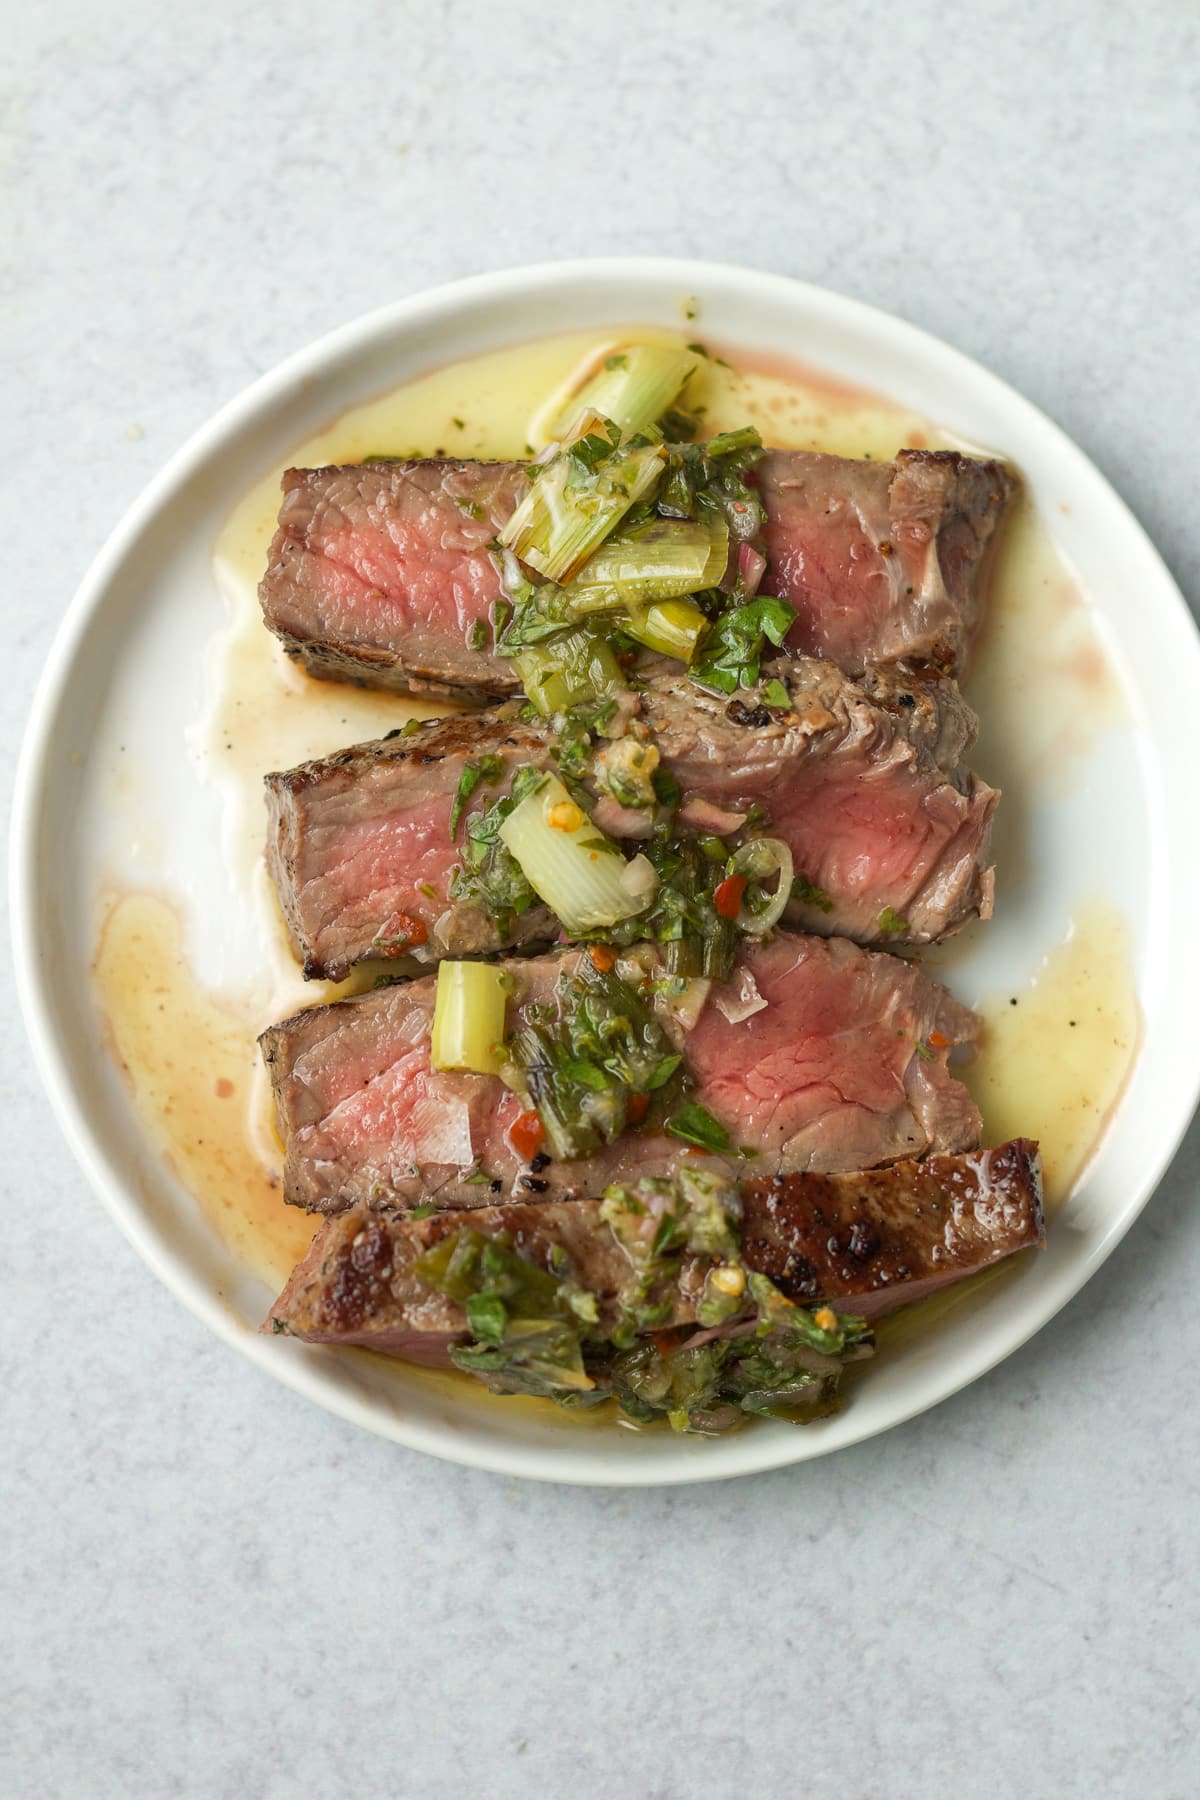 Grilled scallion chimichurri sauce on thinly sliced steak.